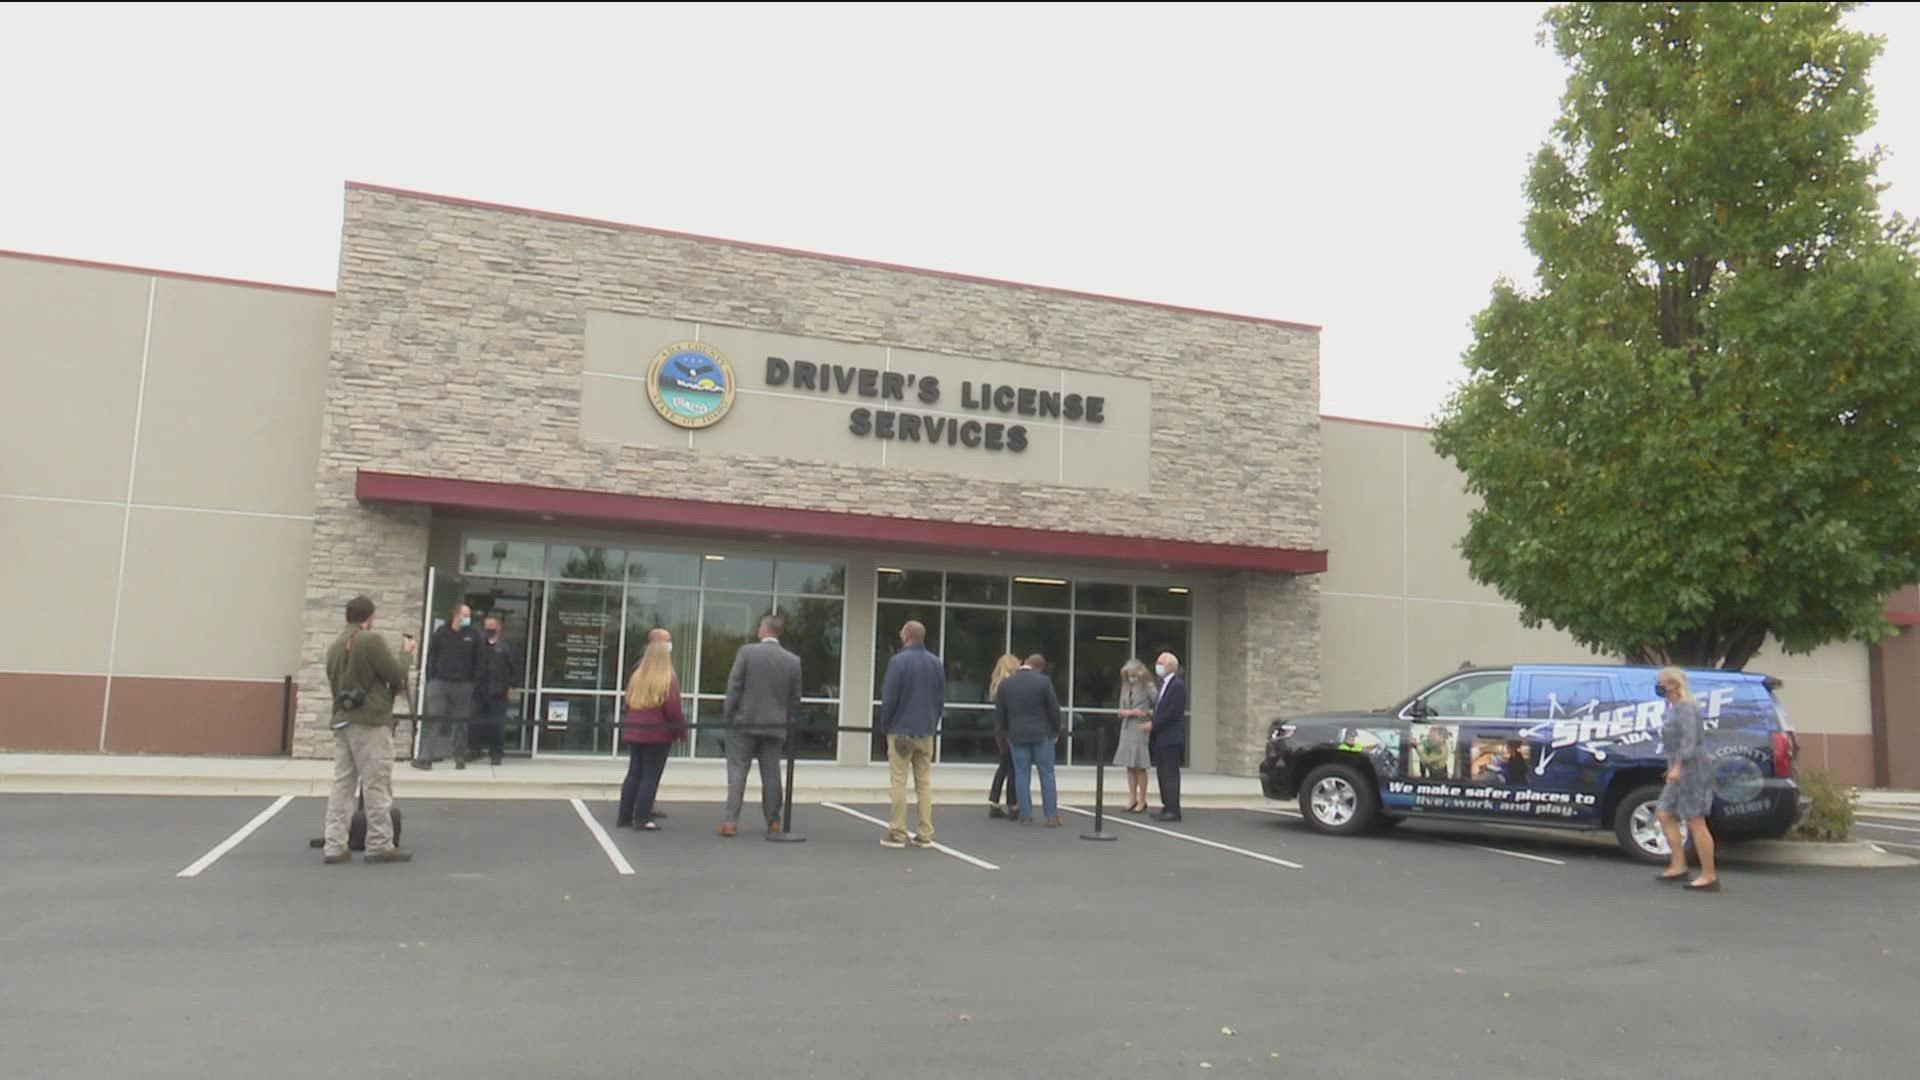 With only one driver's license office in Ada County, lines and waits were long. County Commissioners say this second office will be convenient for the whole county.